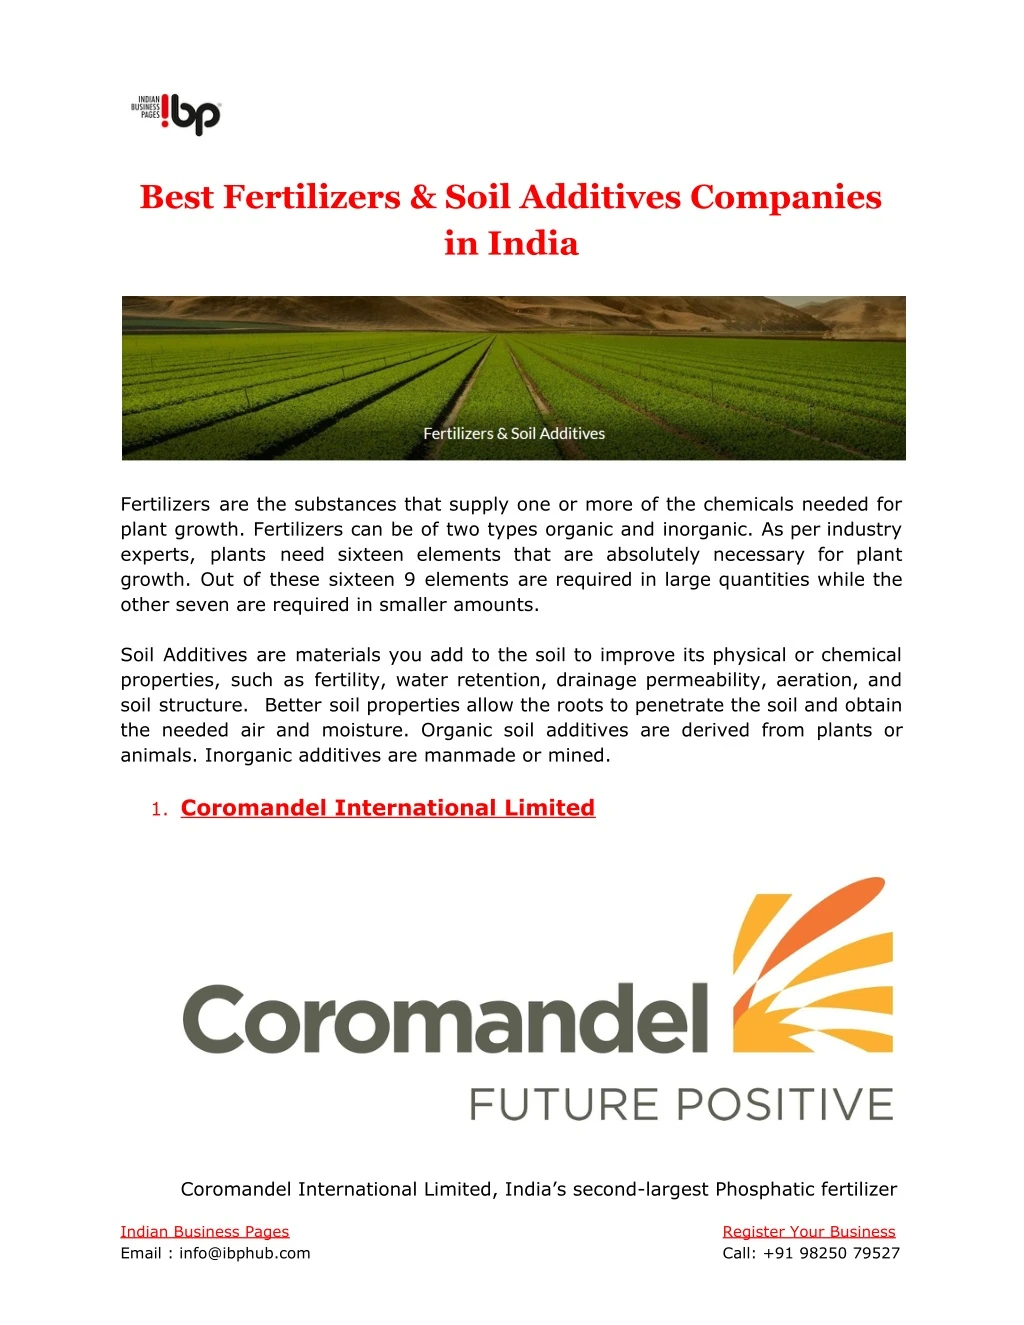 best fertilizers soil additives companies in india